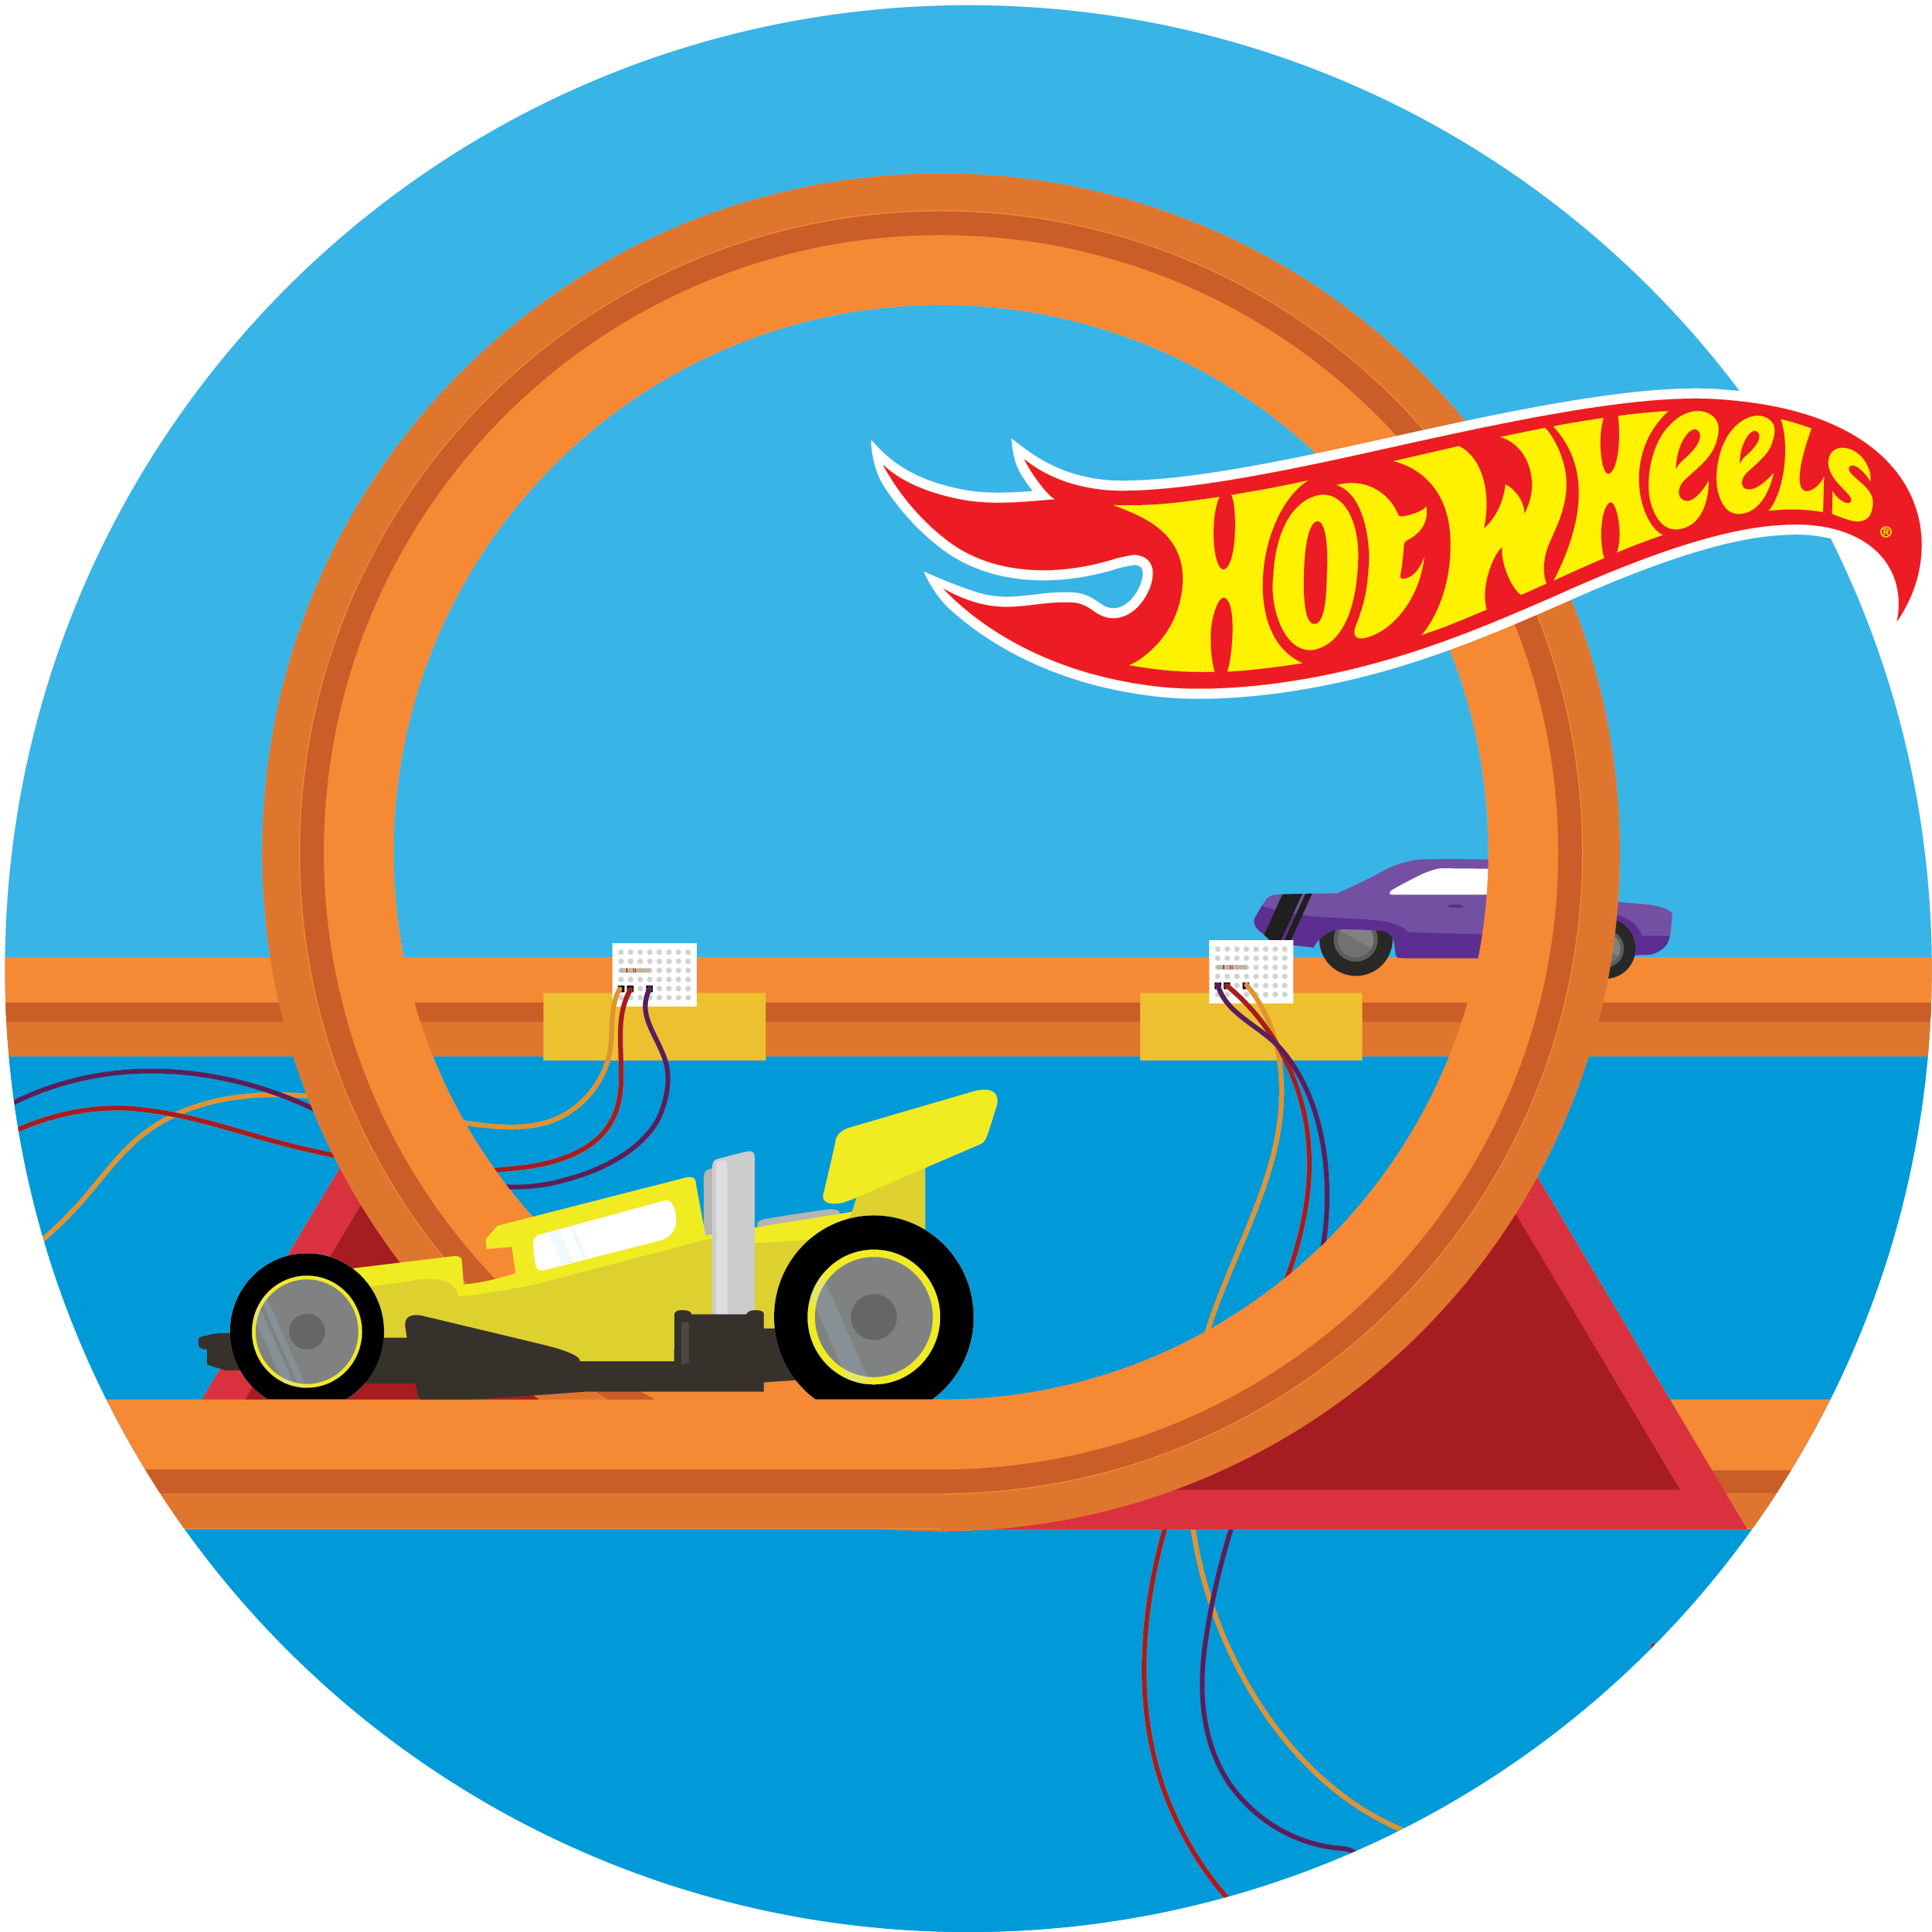 Circular Illustration Of A Light Gate Being Used Along - Chevy Blazer 4x4 Hot Wheels 2016 Hw Rescue 1:64 Scale (2501x2501)